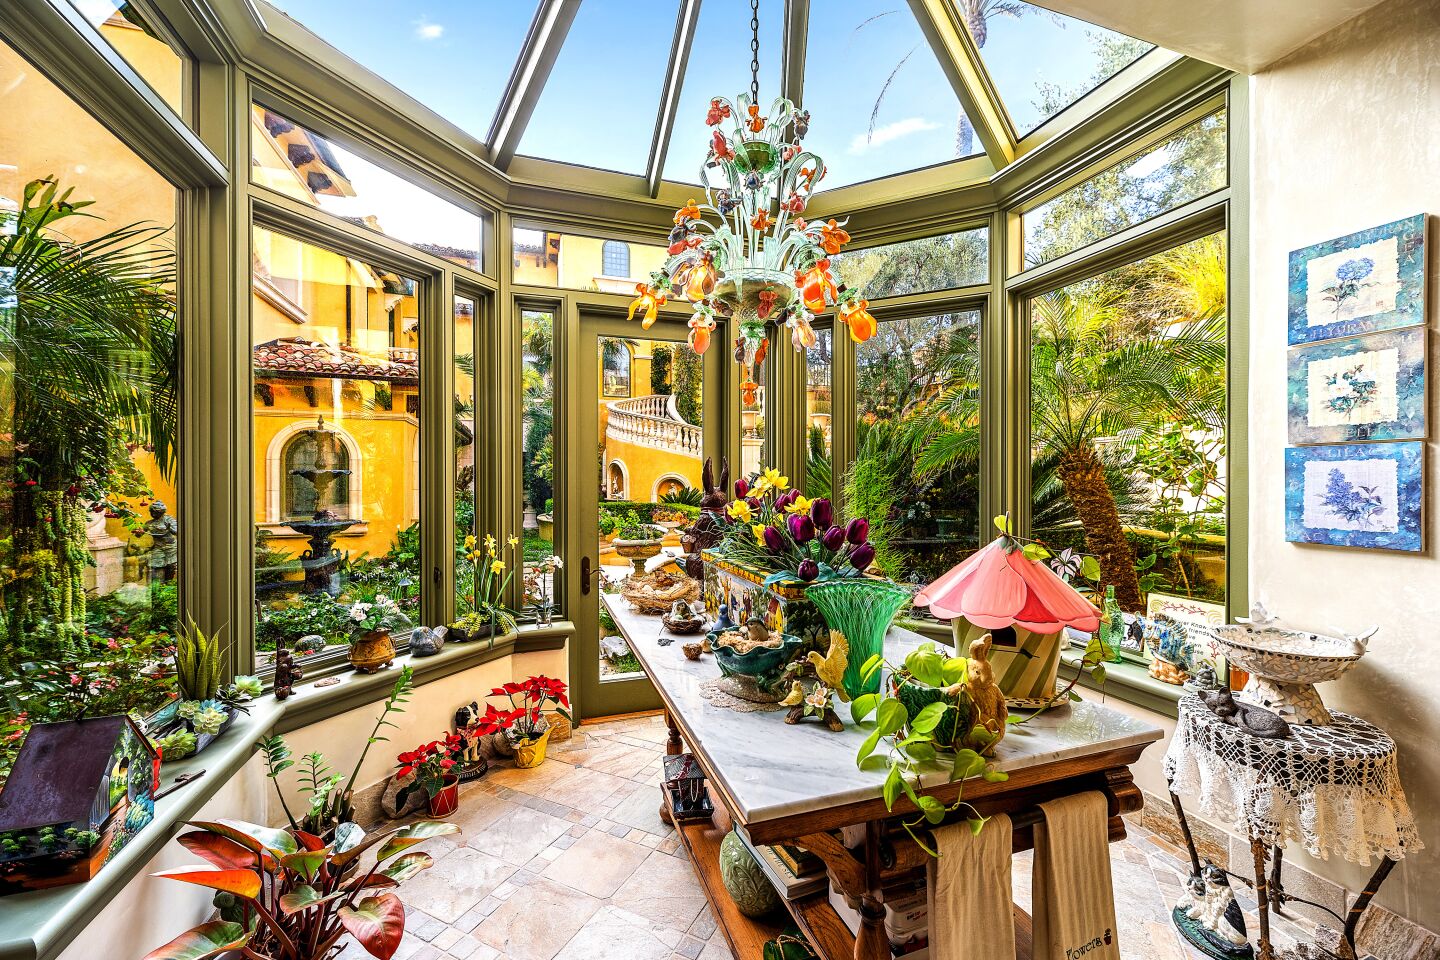 Plants fill a room with glass walls and ceiling.